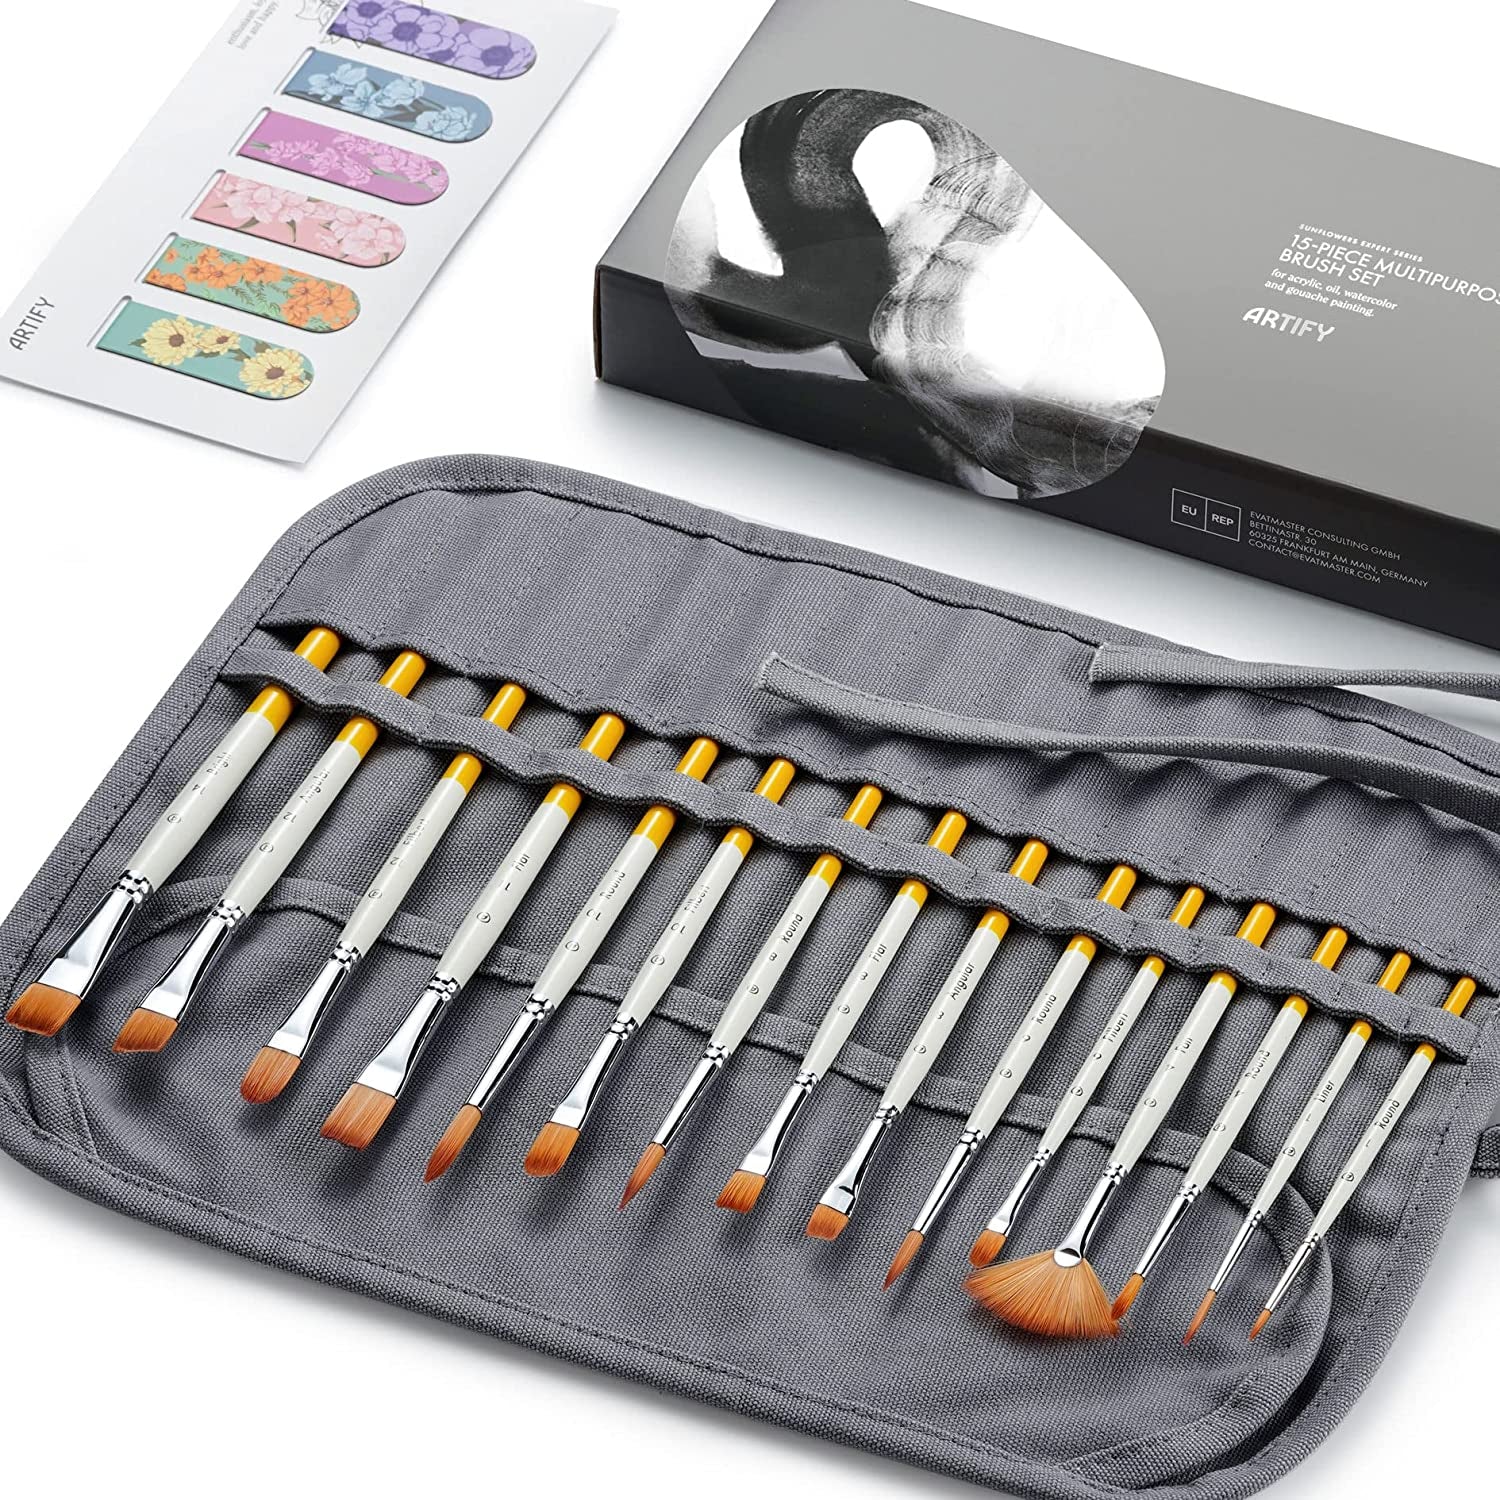 ARTIFY 15 Pieces Paint Brush Set, Intermediate Series, Includes Pop-Up Carrying Case with Palette Knife and 2 Sponges, for Acrylic, Oil, Watercolor and Gouache Painting - Pearl White